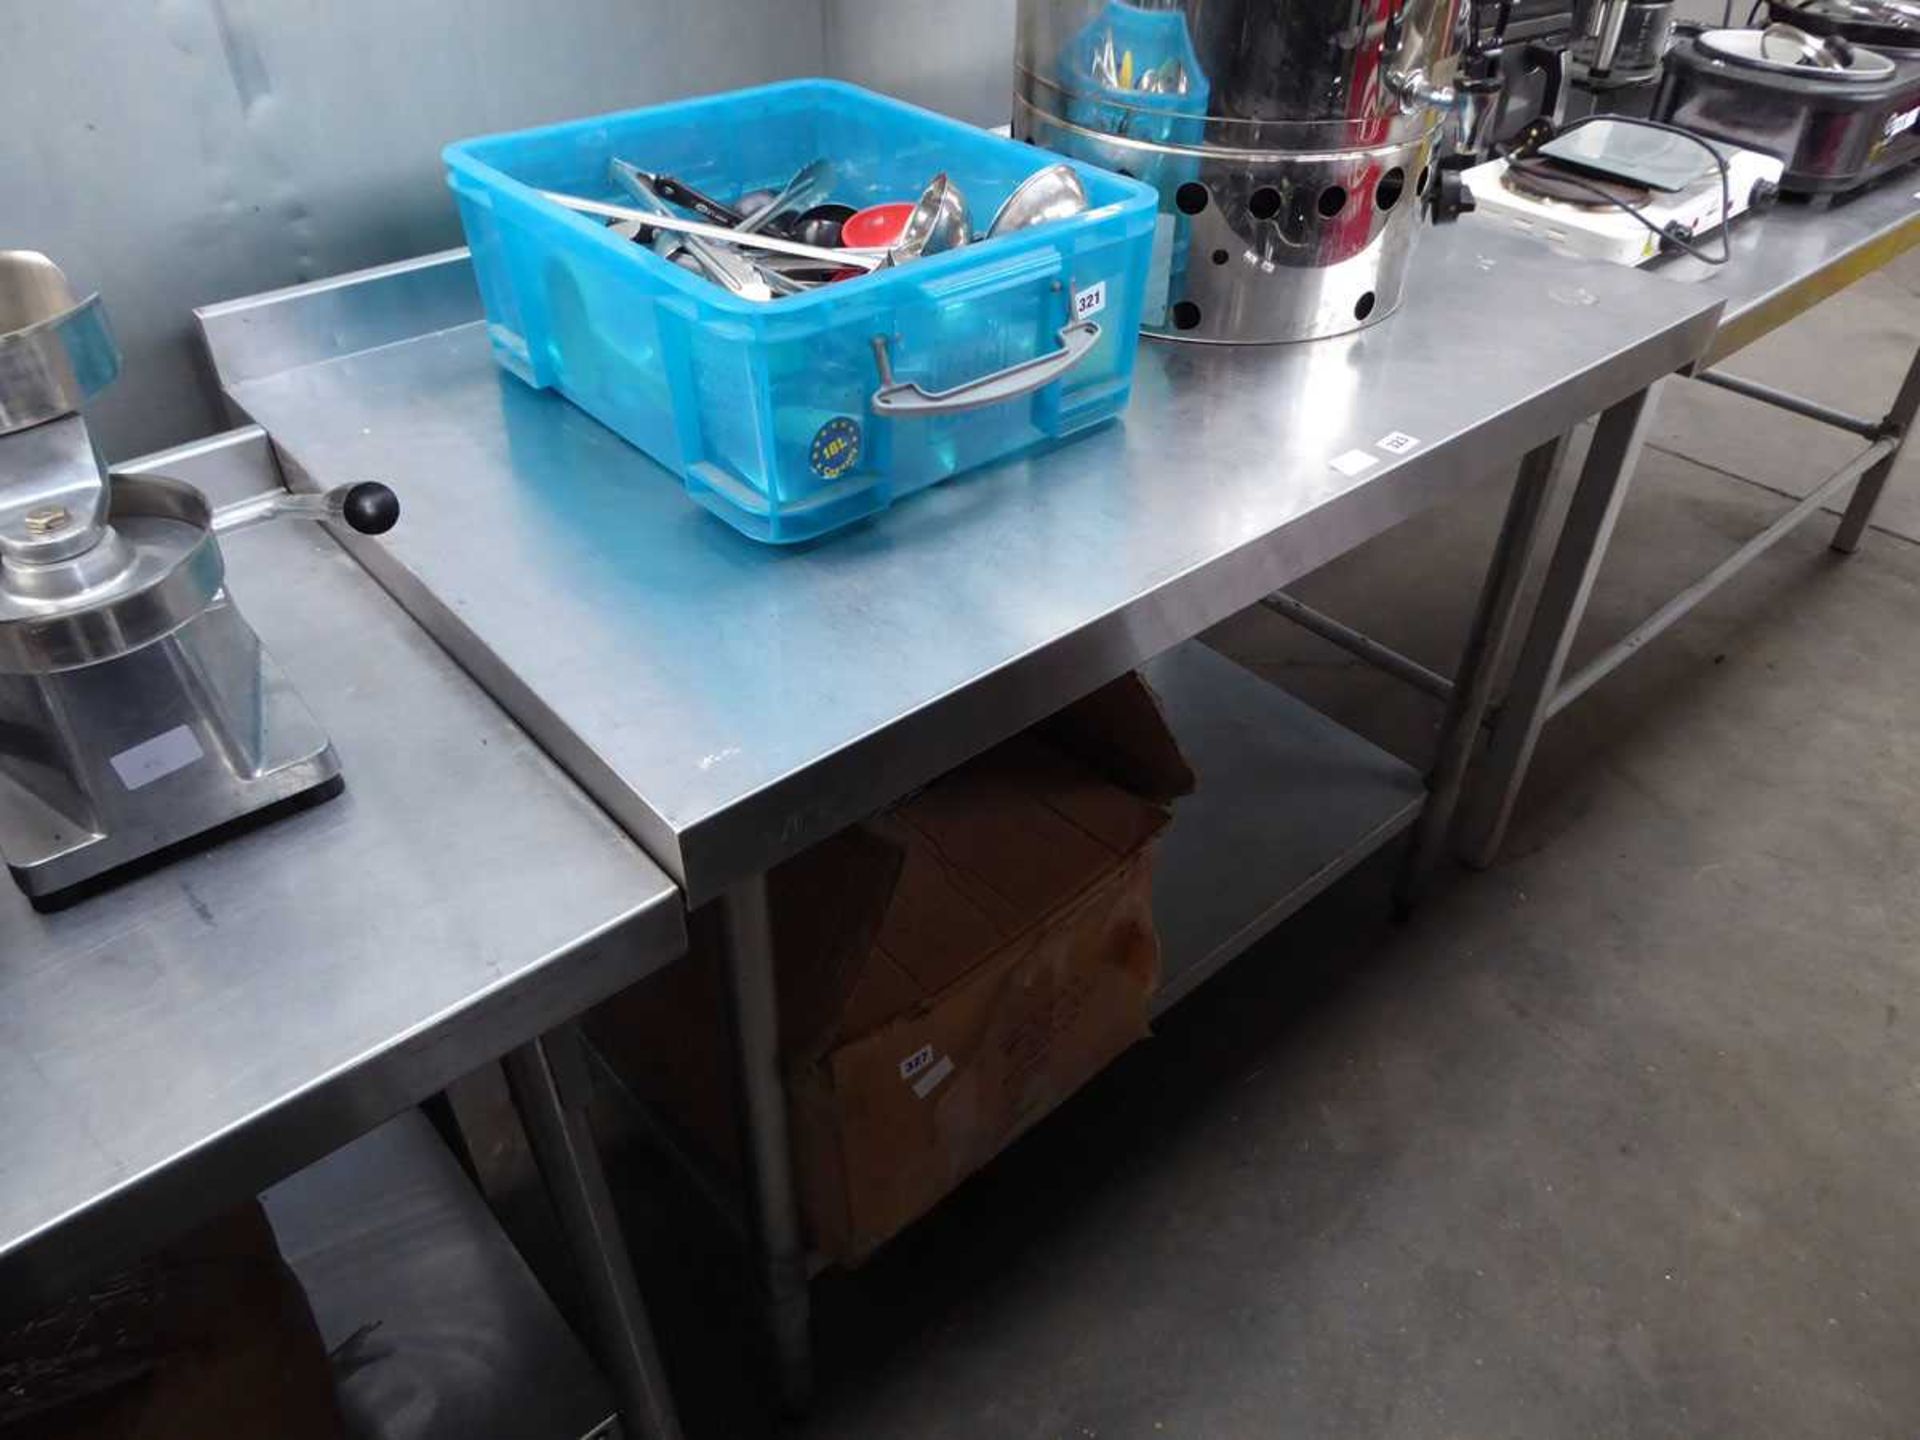 120cm stainless steel preparation table with shelf under